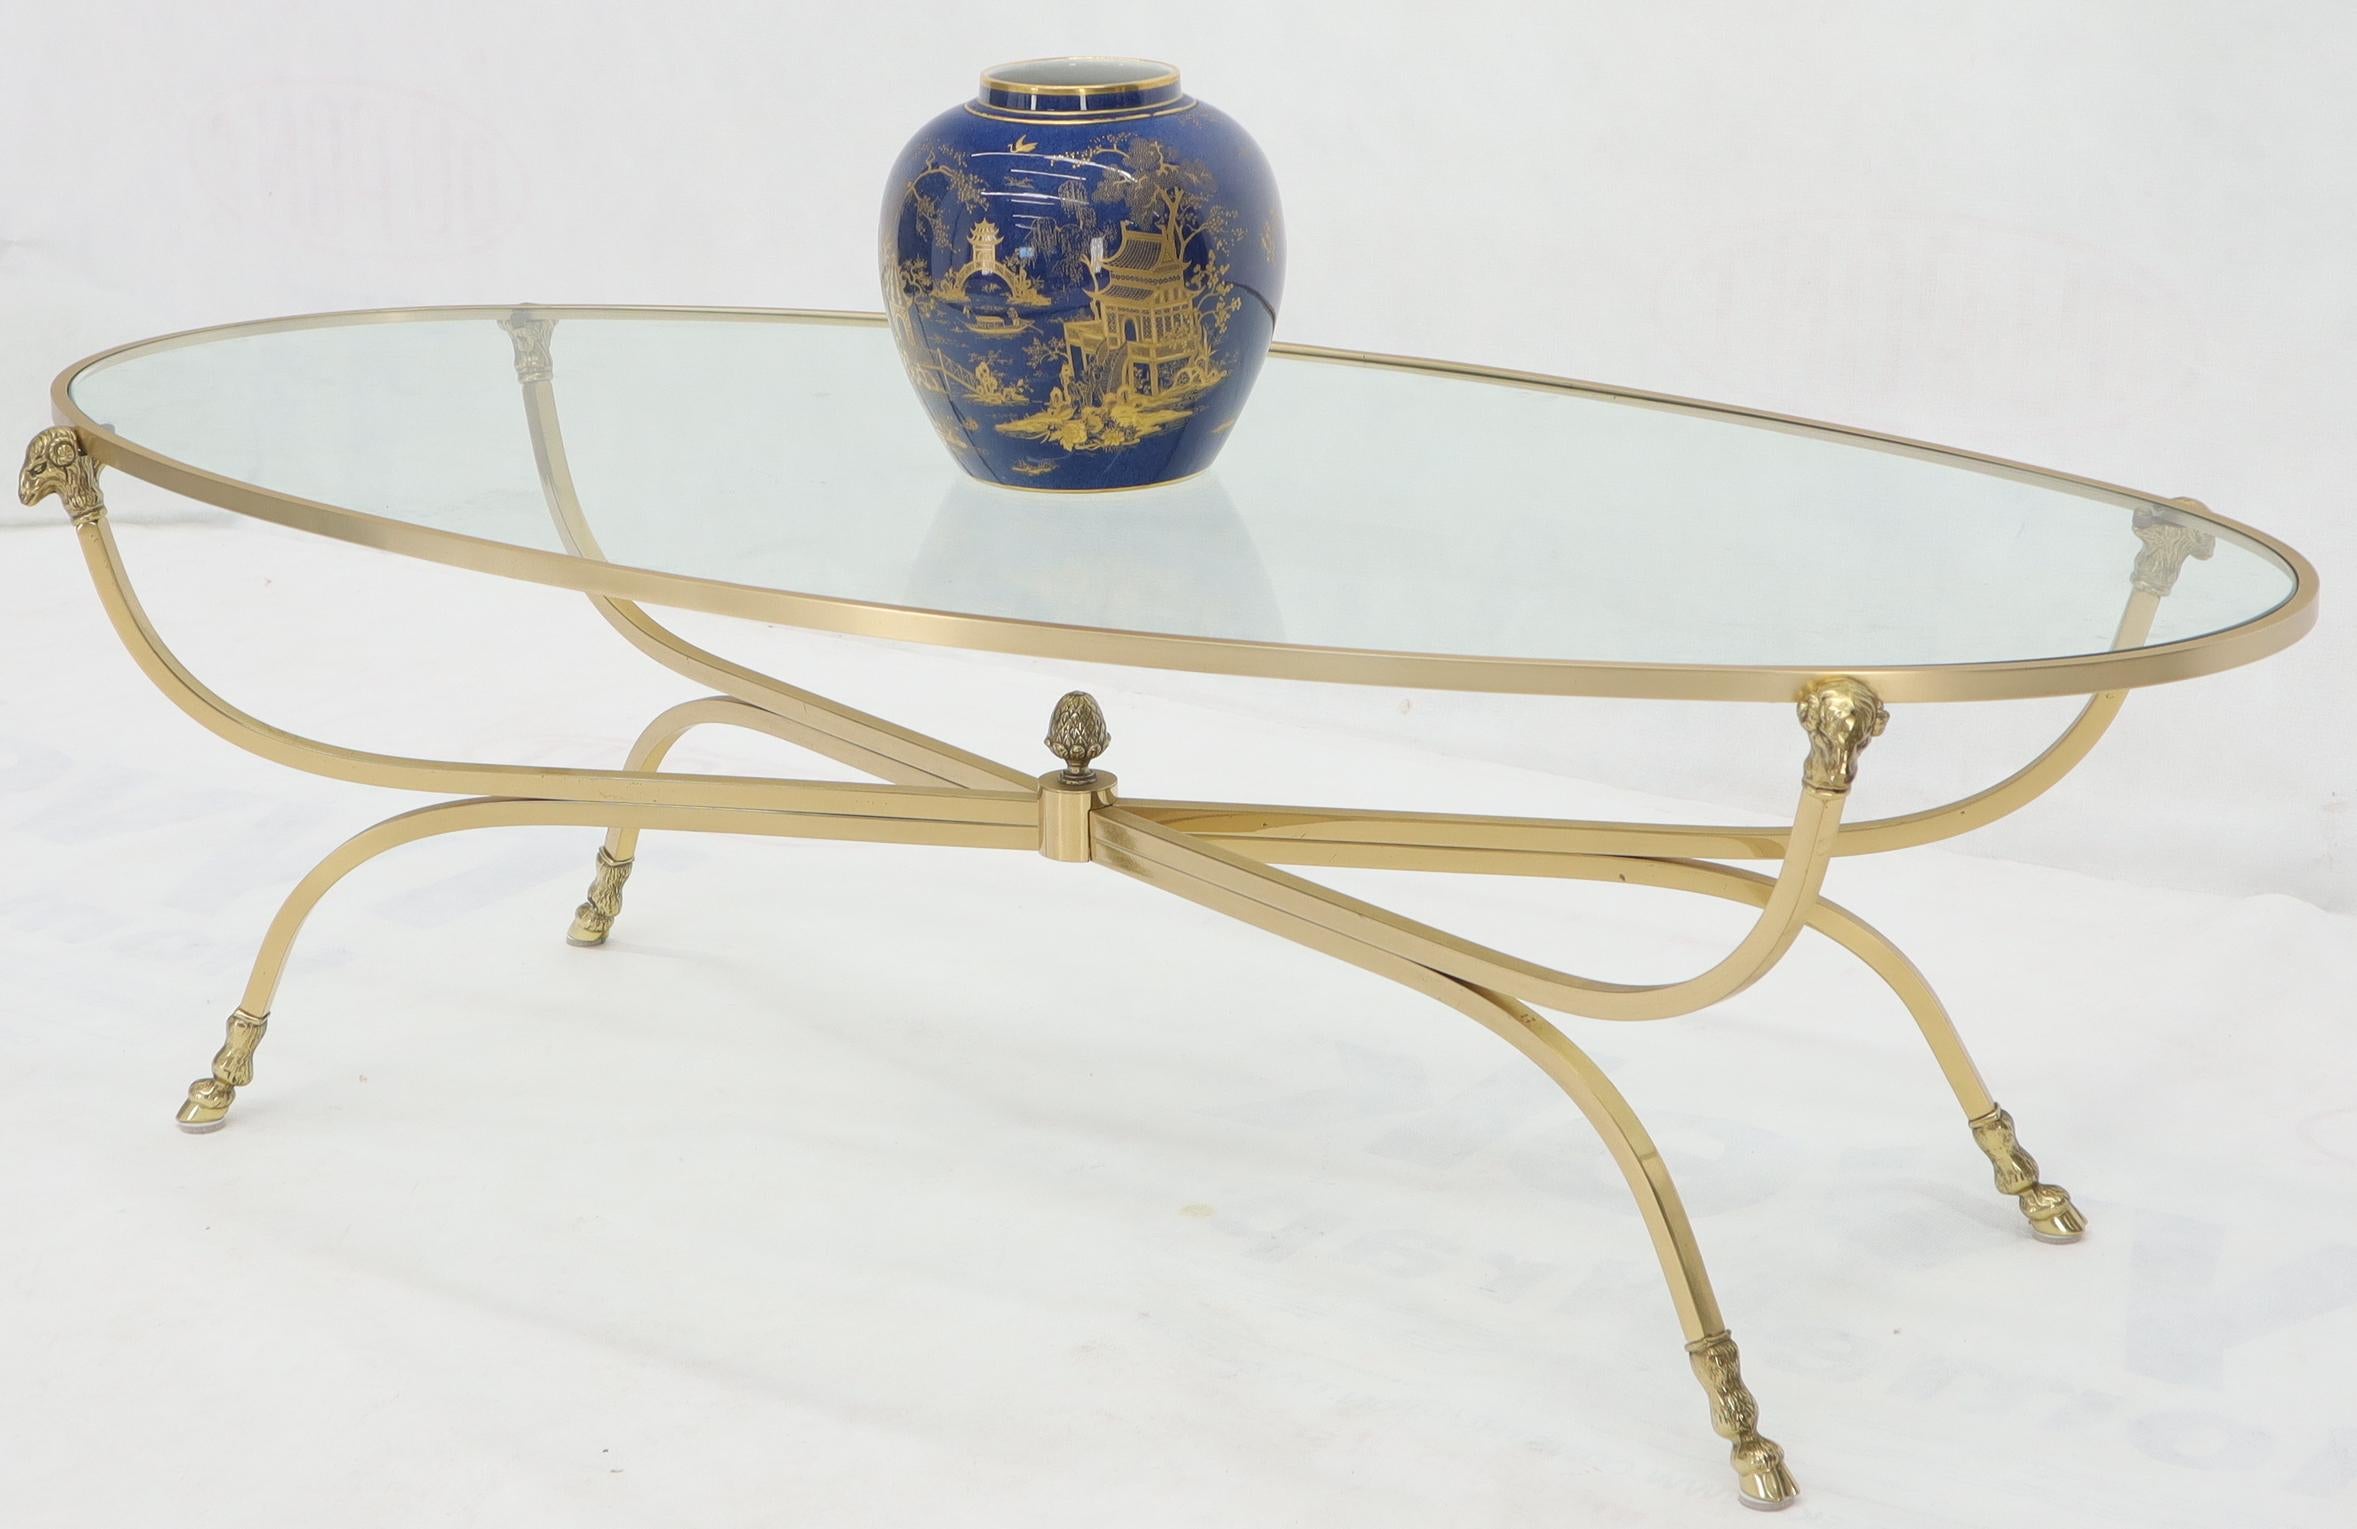 Large solid brass oval coffee table with rams head finials and hoof feet. Made in Italy.